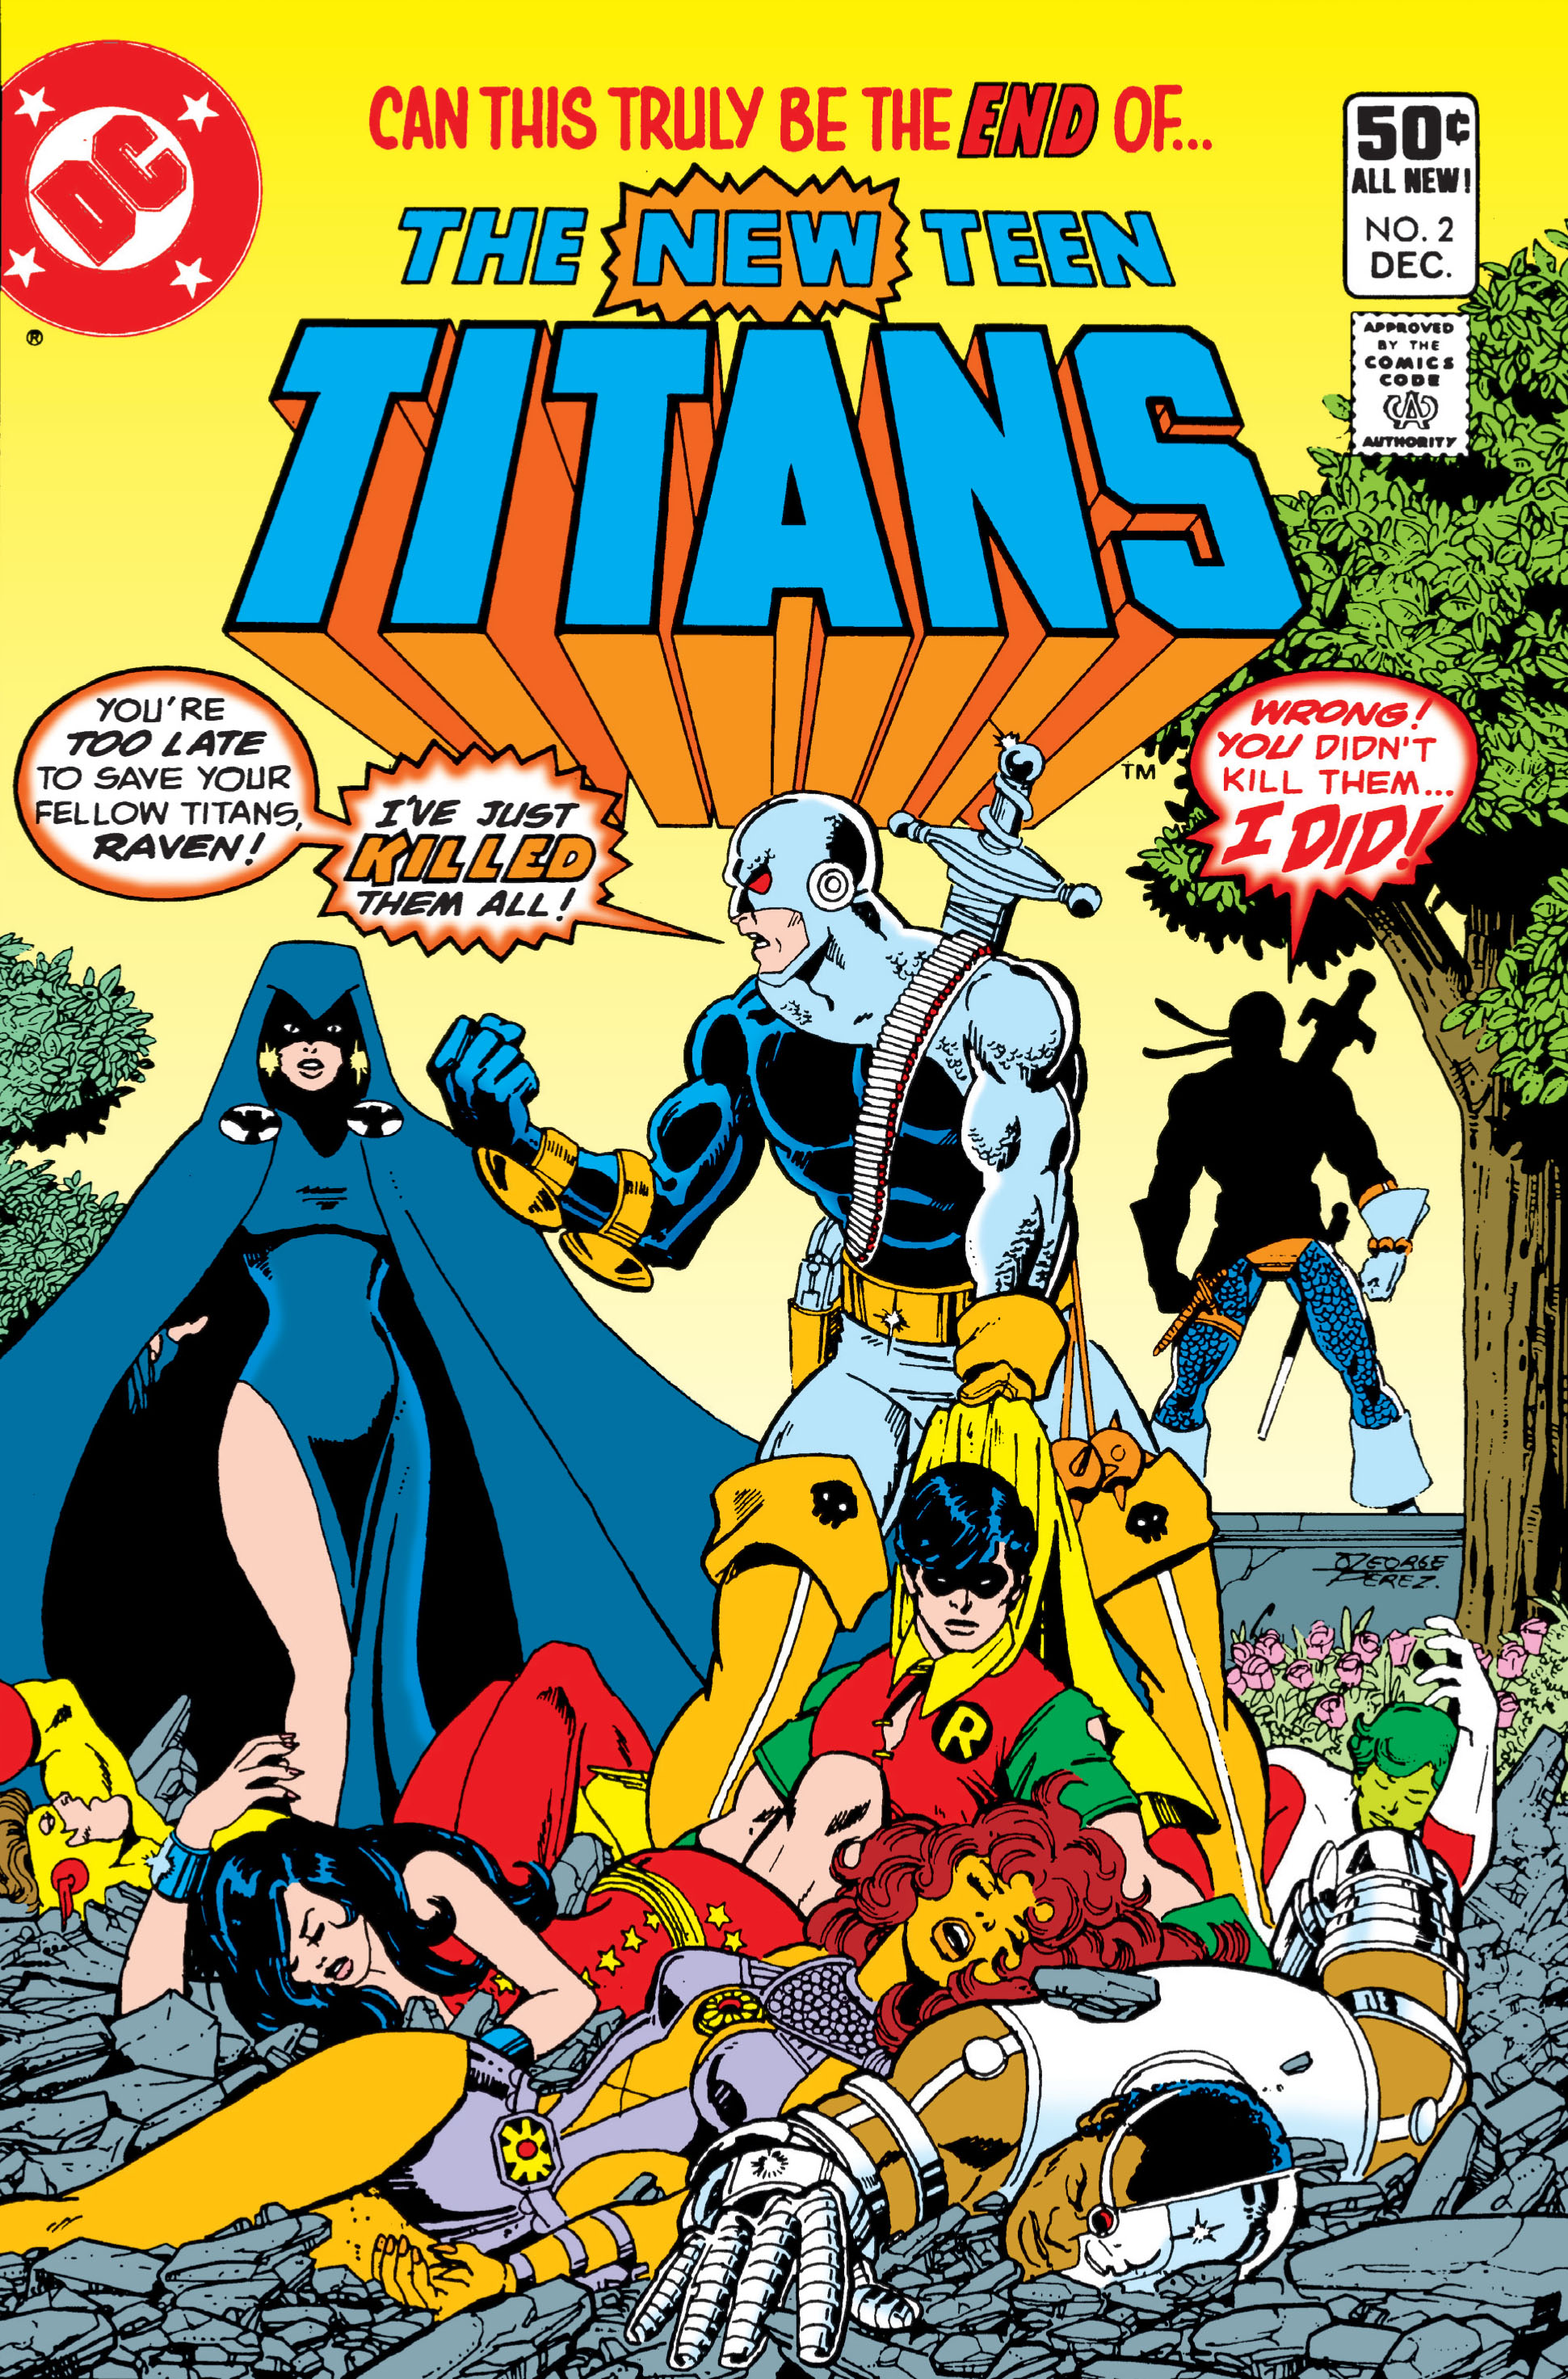 1980s Comic Book Porn - The New Teen Titans 1980 Issue 2 | Read The New Teen Titans 1980 Issue 2  comic online in high quality. Read Full Comic online for free - Read comics  online in high quality .|viewcomiconline.com